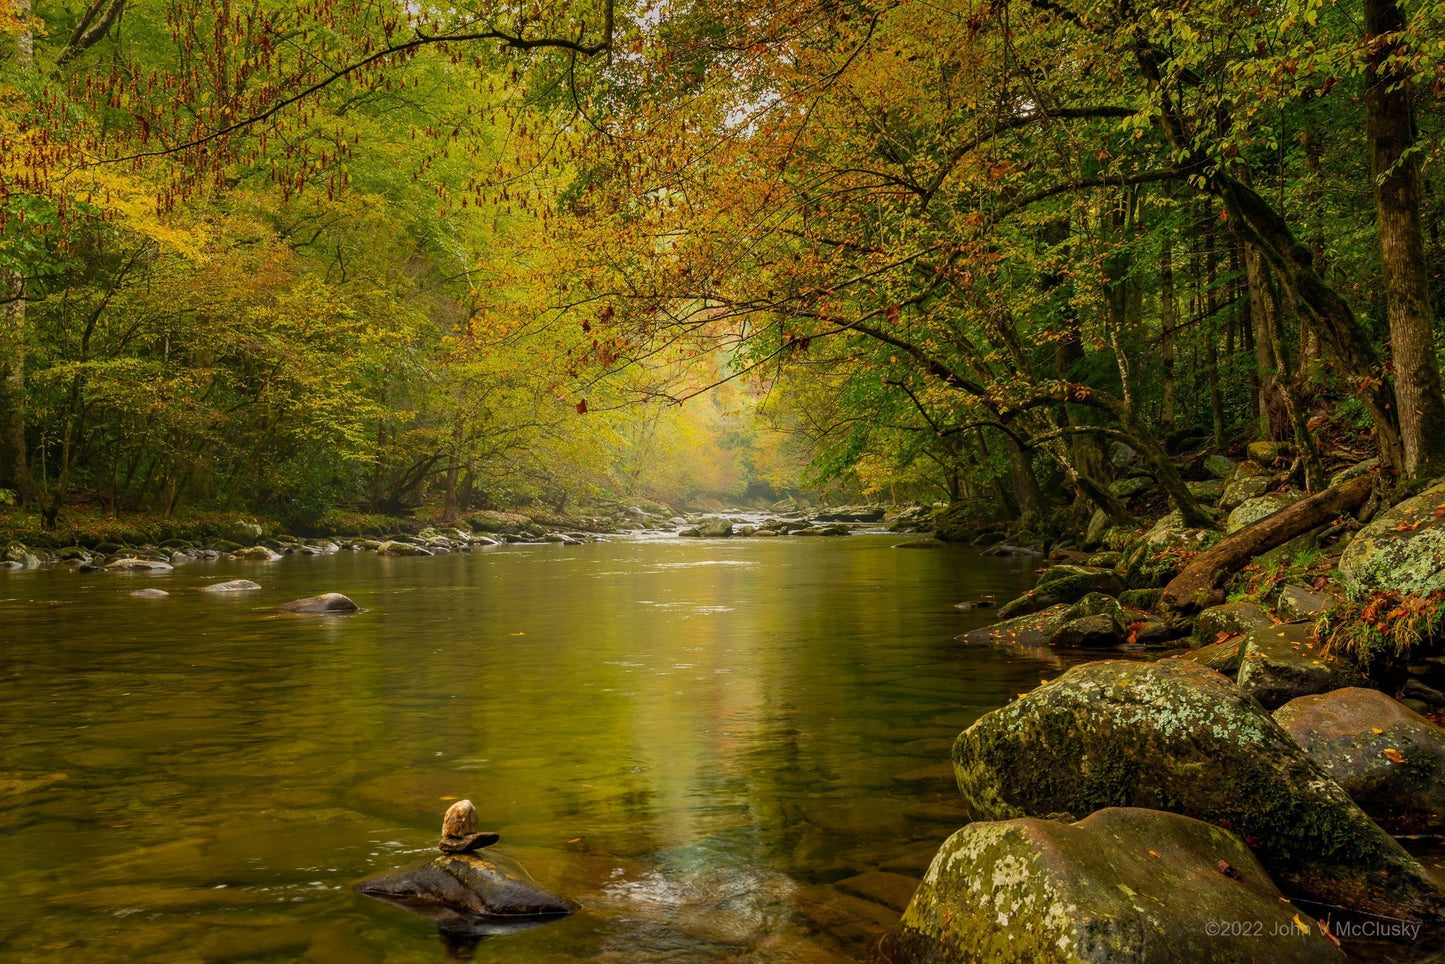 Fall is magical in the mountains! Trees bend over a peaceful, rocky river glowing with the golden light of fall in this fine art nature image.